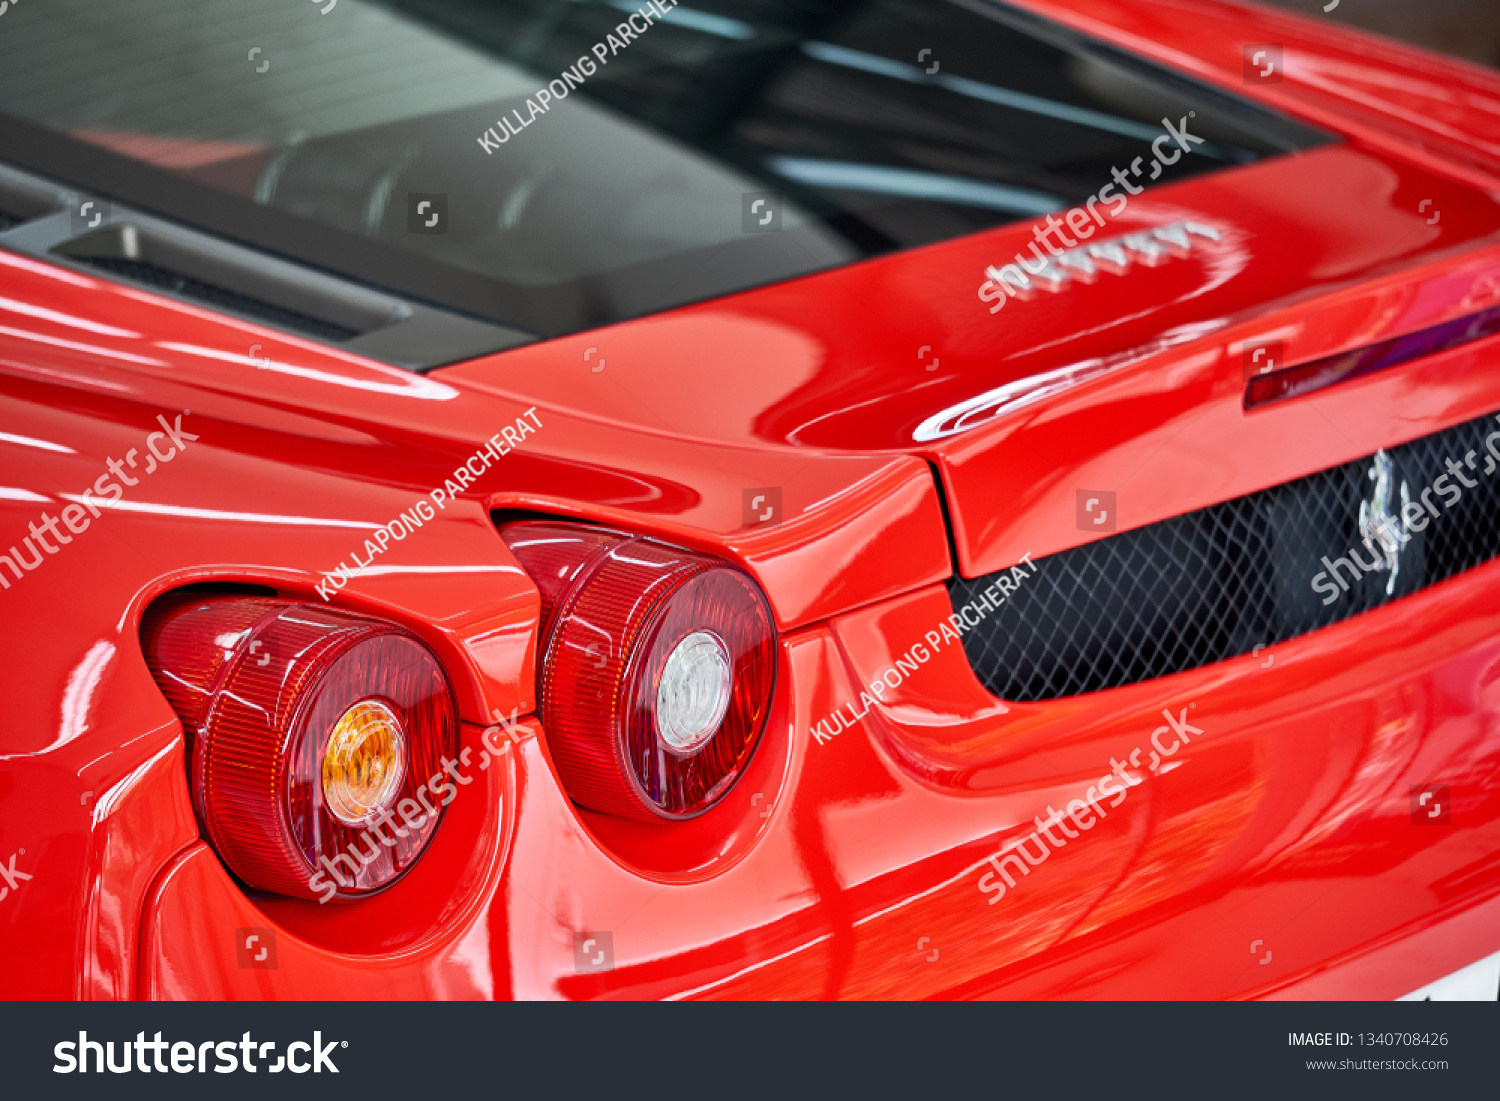 BANGKOK, THAILAND - FEBRUARY 21, 2019: Shiny red Ferrari F430 supercar taillight with reflection on paint. Luxury sports car after ceramic coat. Car detailing & garage concept. Automotive background. #1340708426